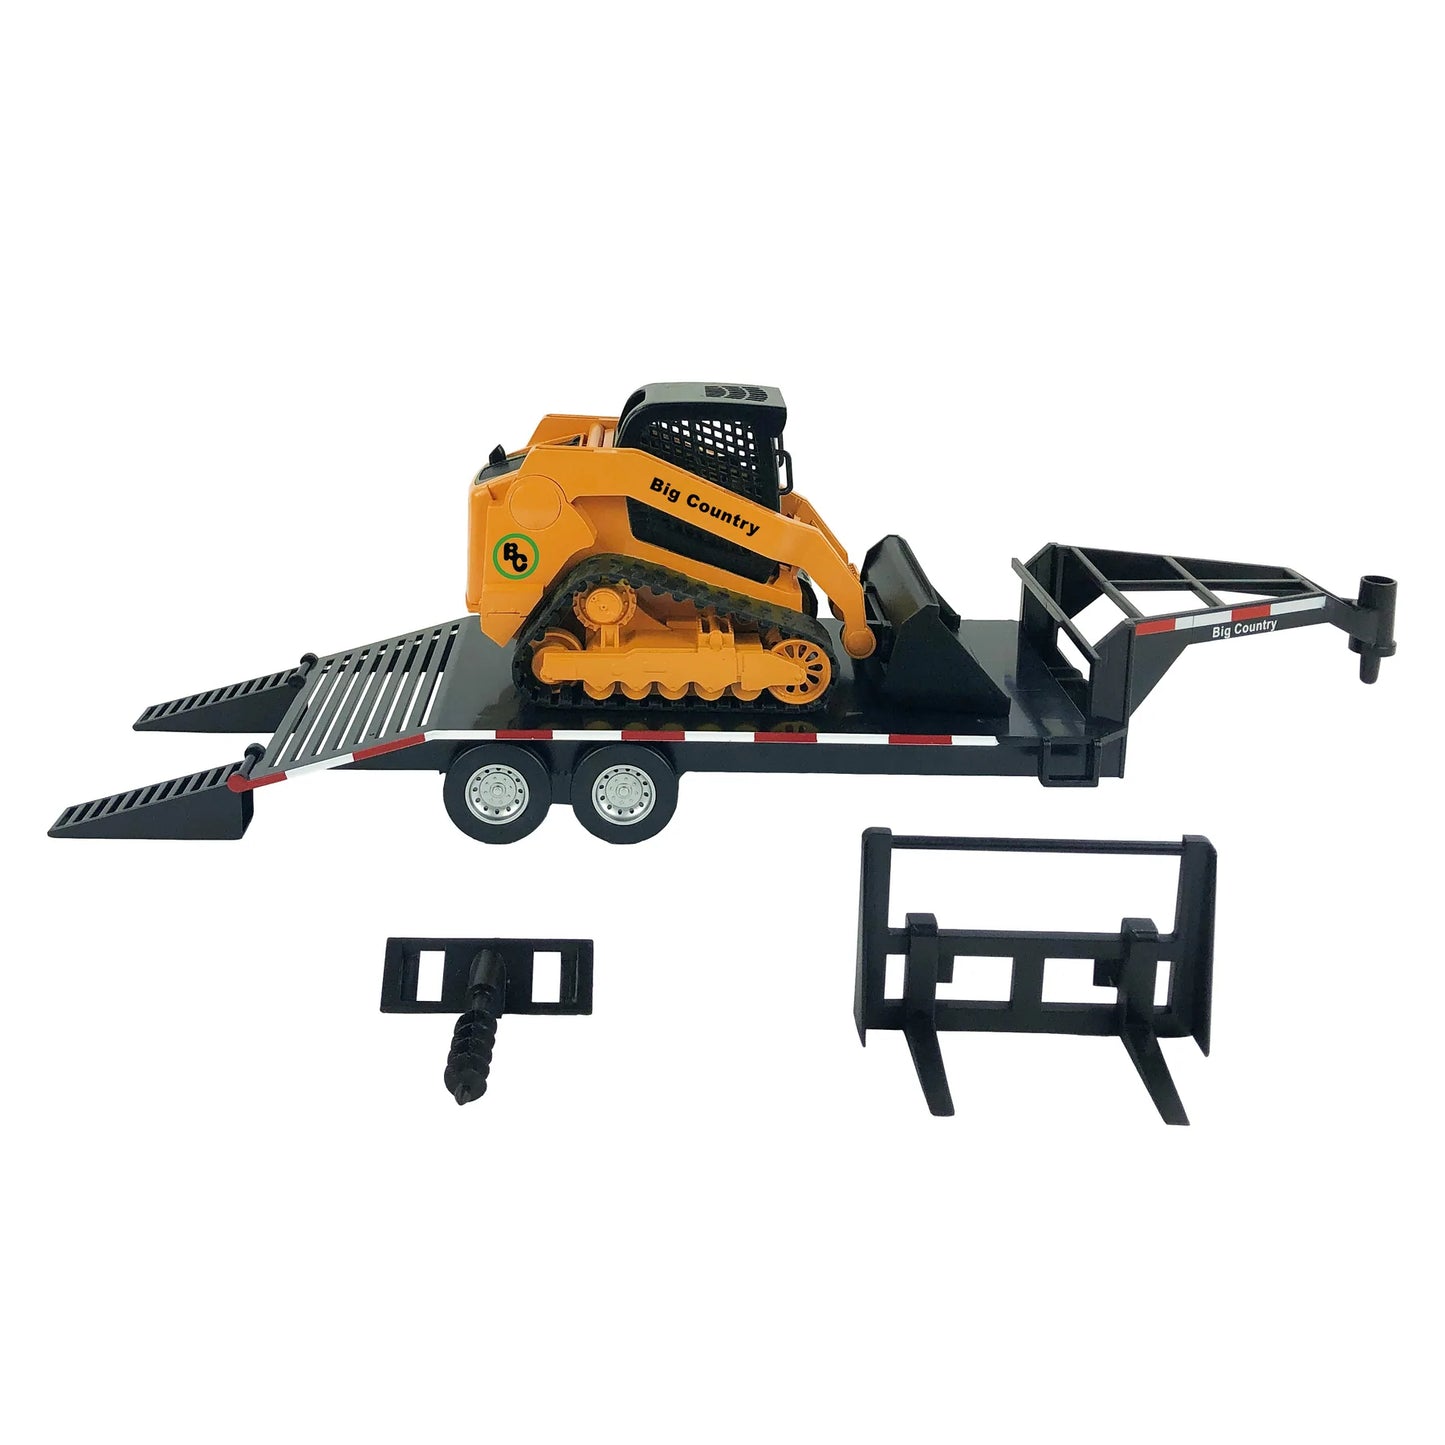 Big Country Toys Track Skid Steer, Trailer and Accessories